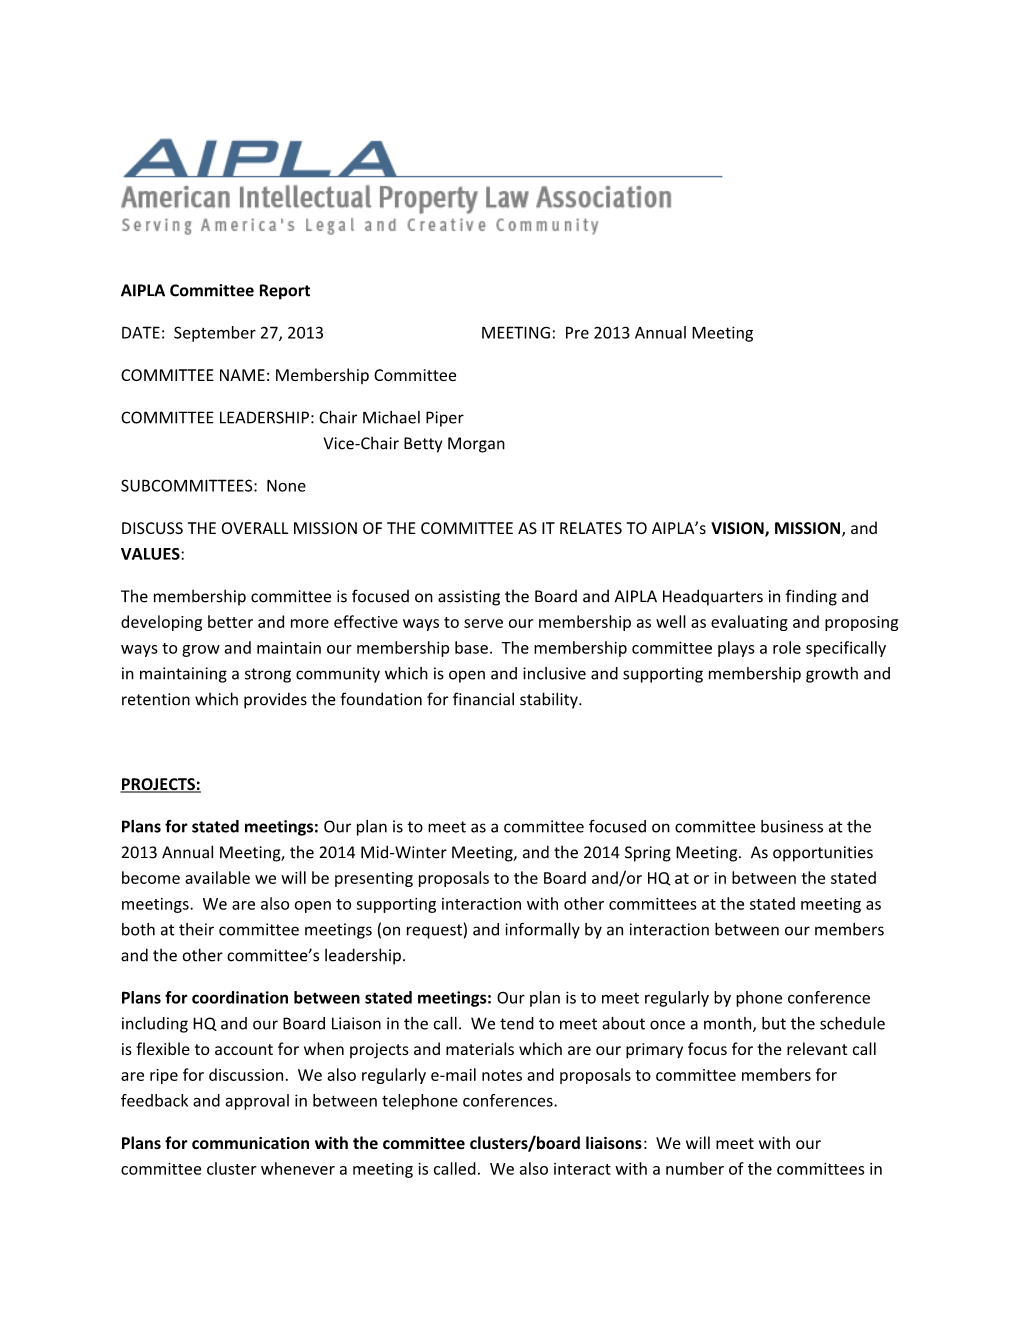 AIPLA Committee Report